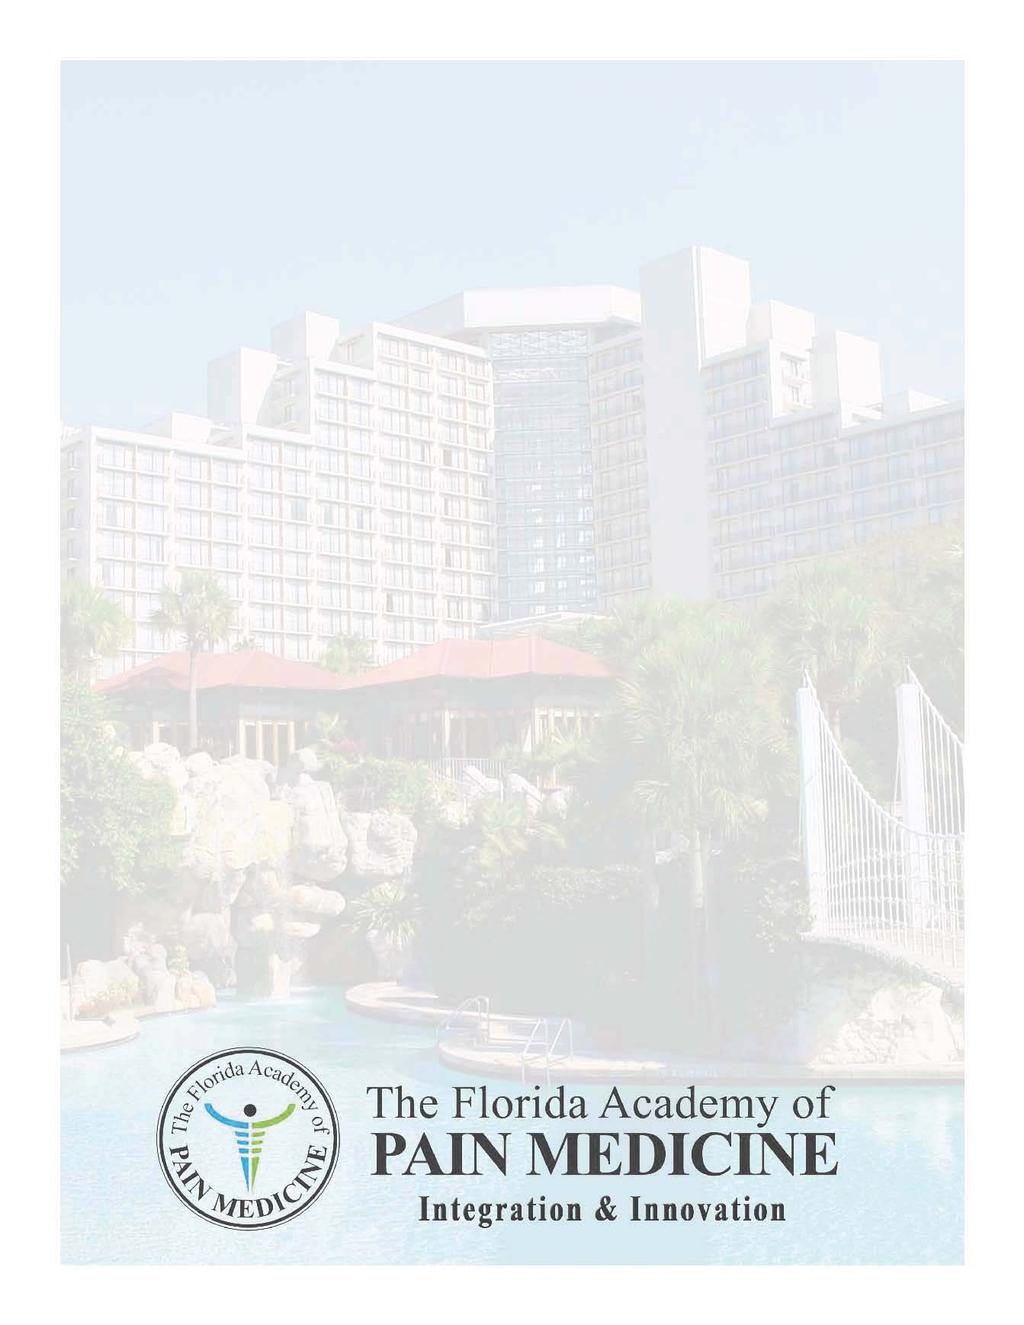 An Invitation to Sponsor & Exhibit Florida Academy of Pain Medicine 201 Annual Scientific Meeting & Tradeshow June 6 8, 201 In conjunction with: American Academy of Regenerative Orthopedic Medicine